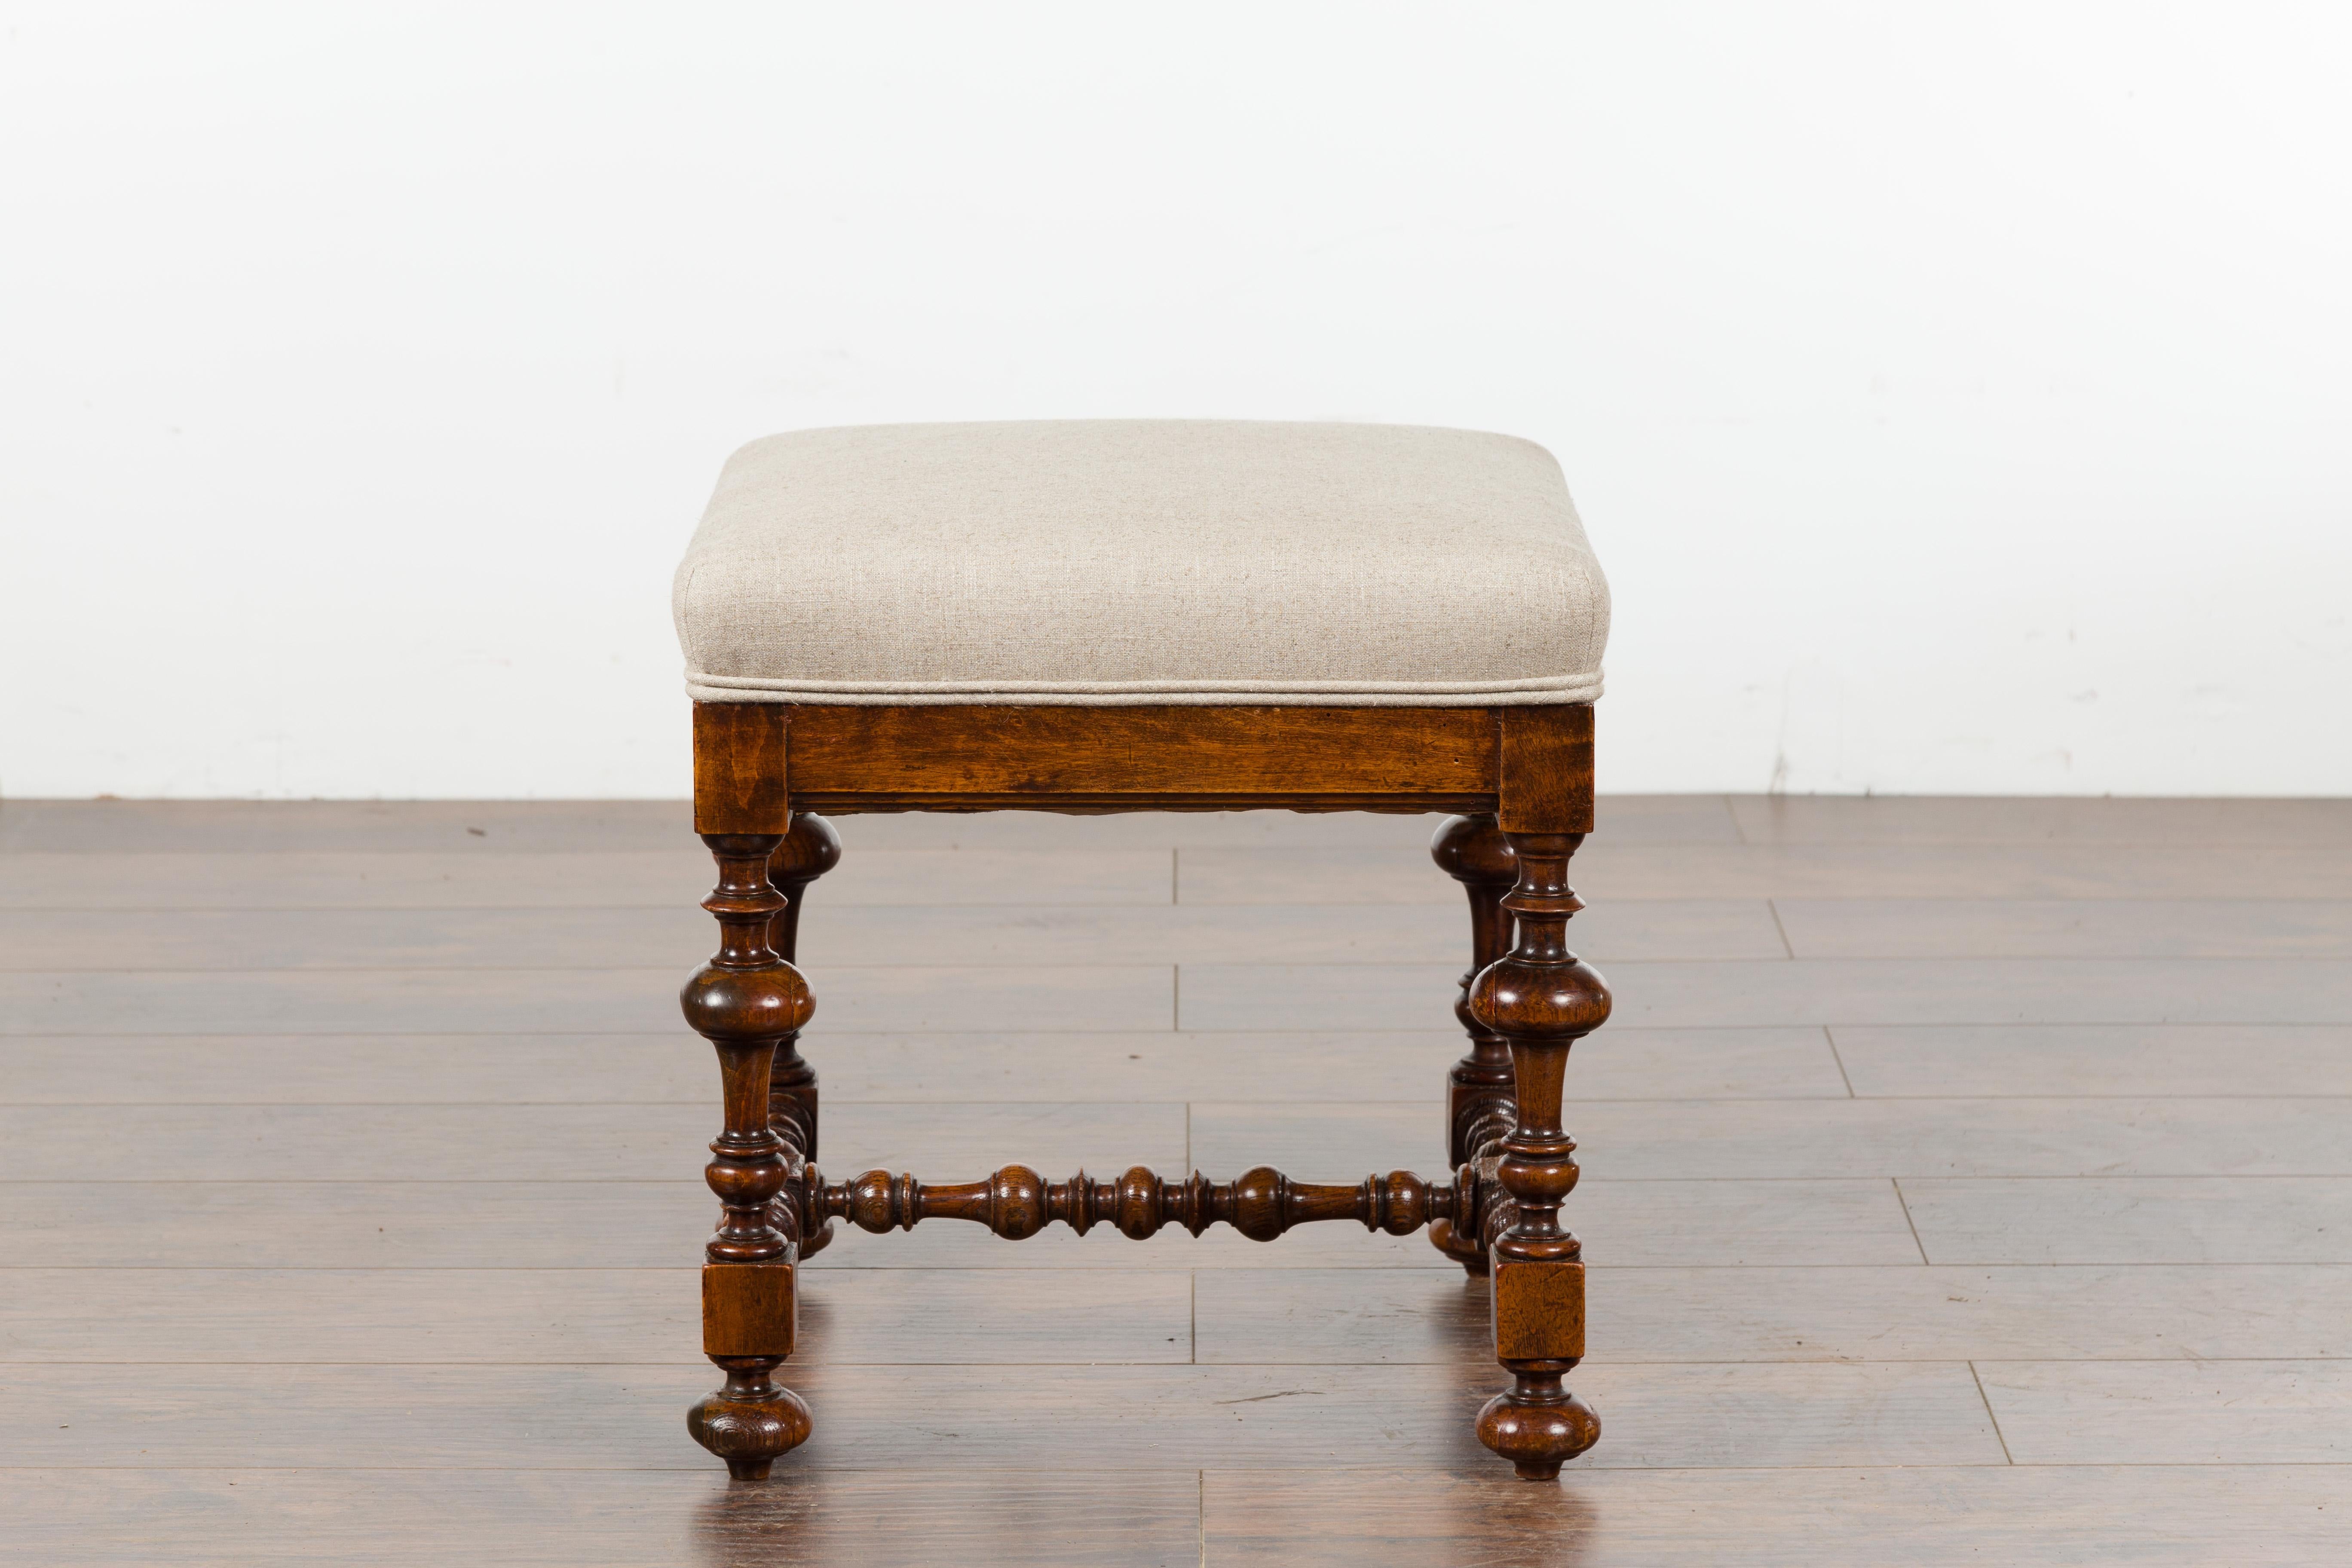 A small English oak stool from the late 19th century, with turned base and new upholstery. Created in England during the last quarter of the 19th century, this oak stool features a square top newly recovered with a linen, double welt fabric. The